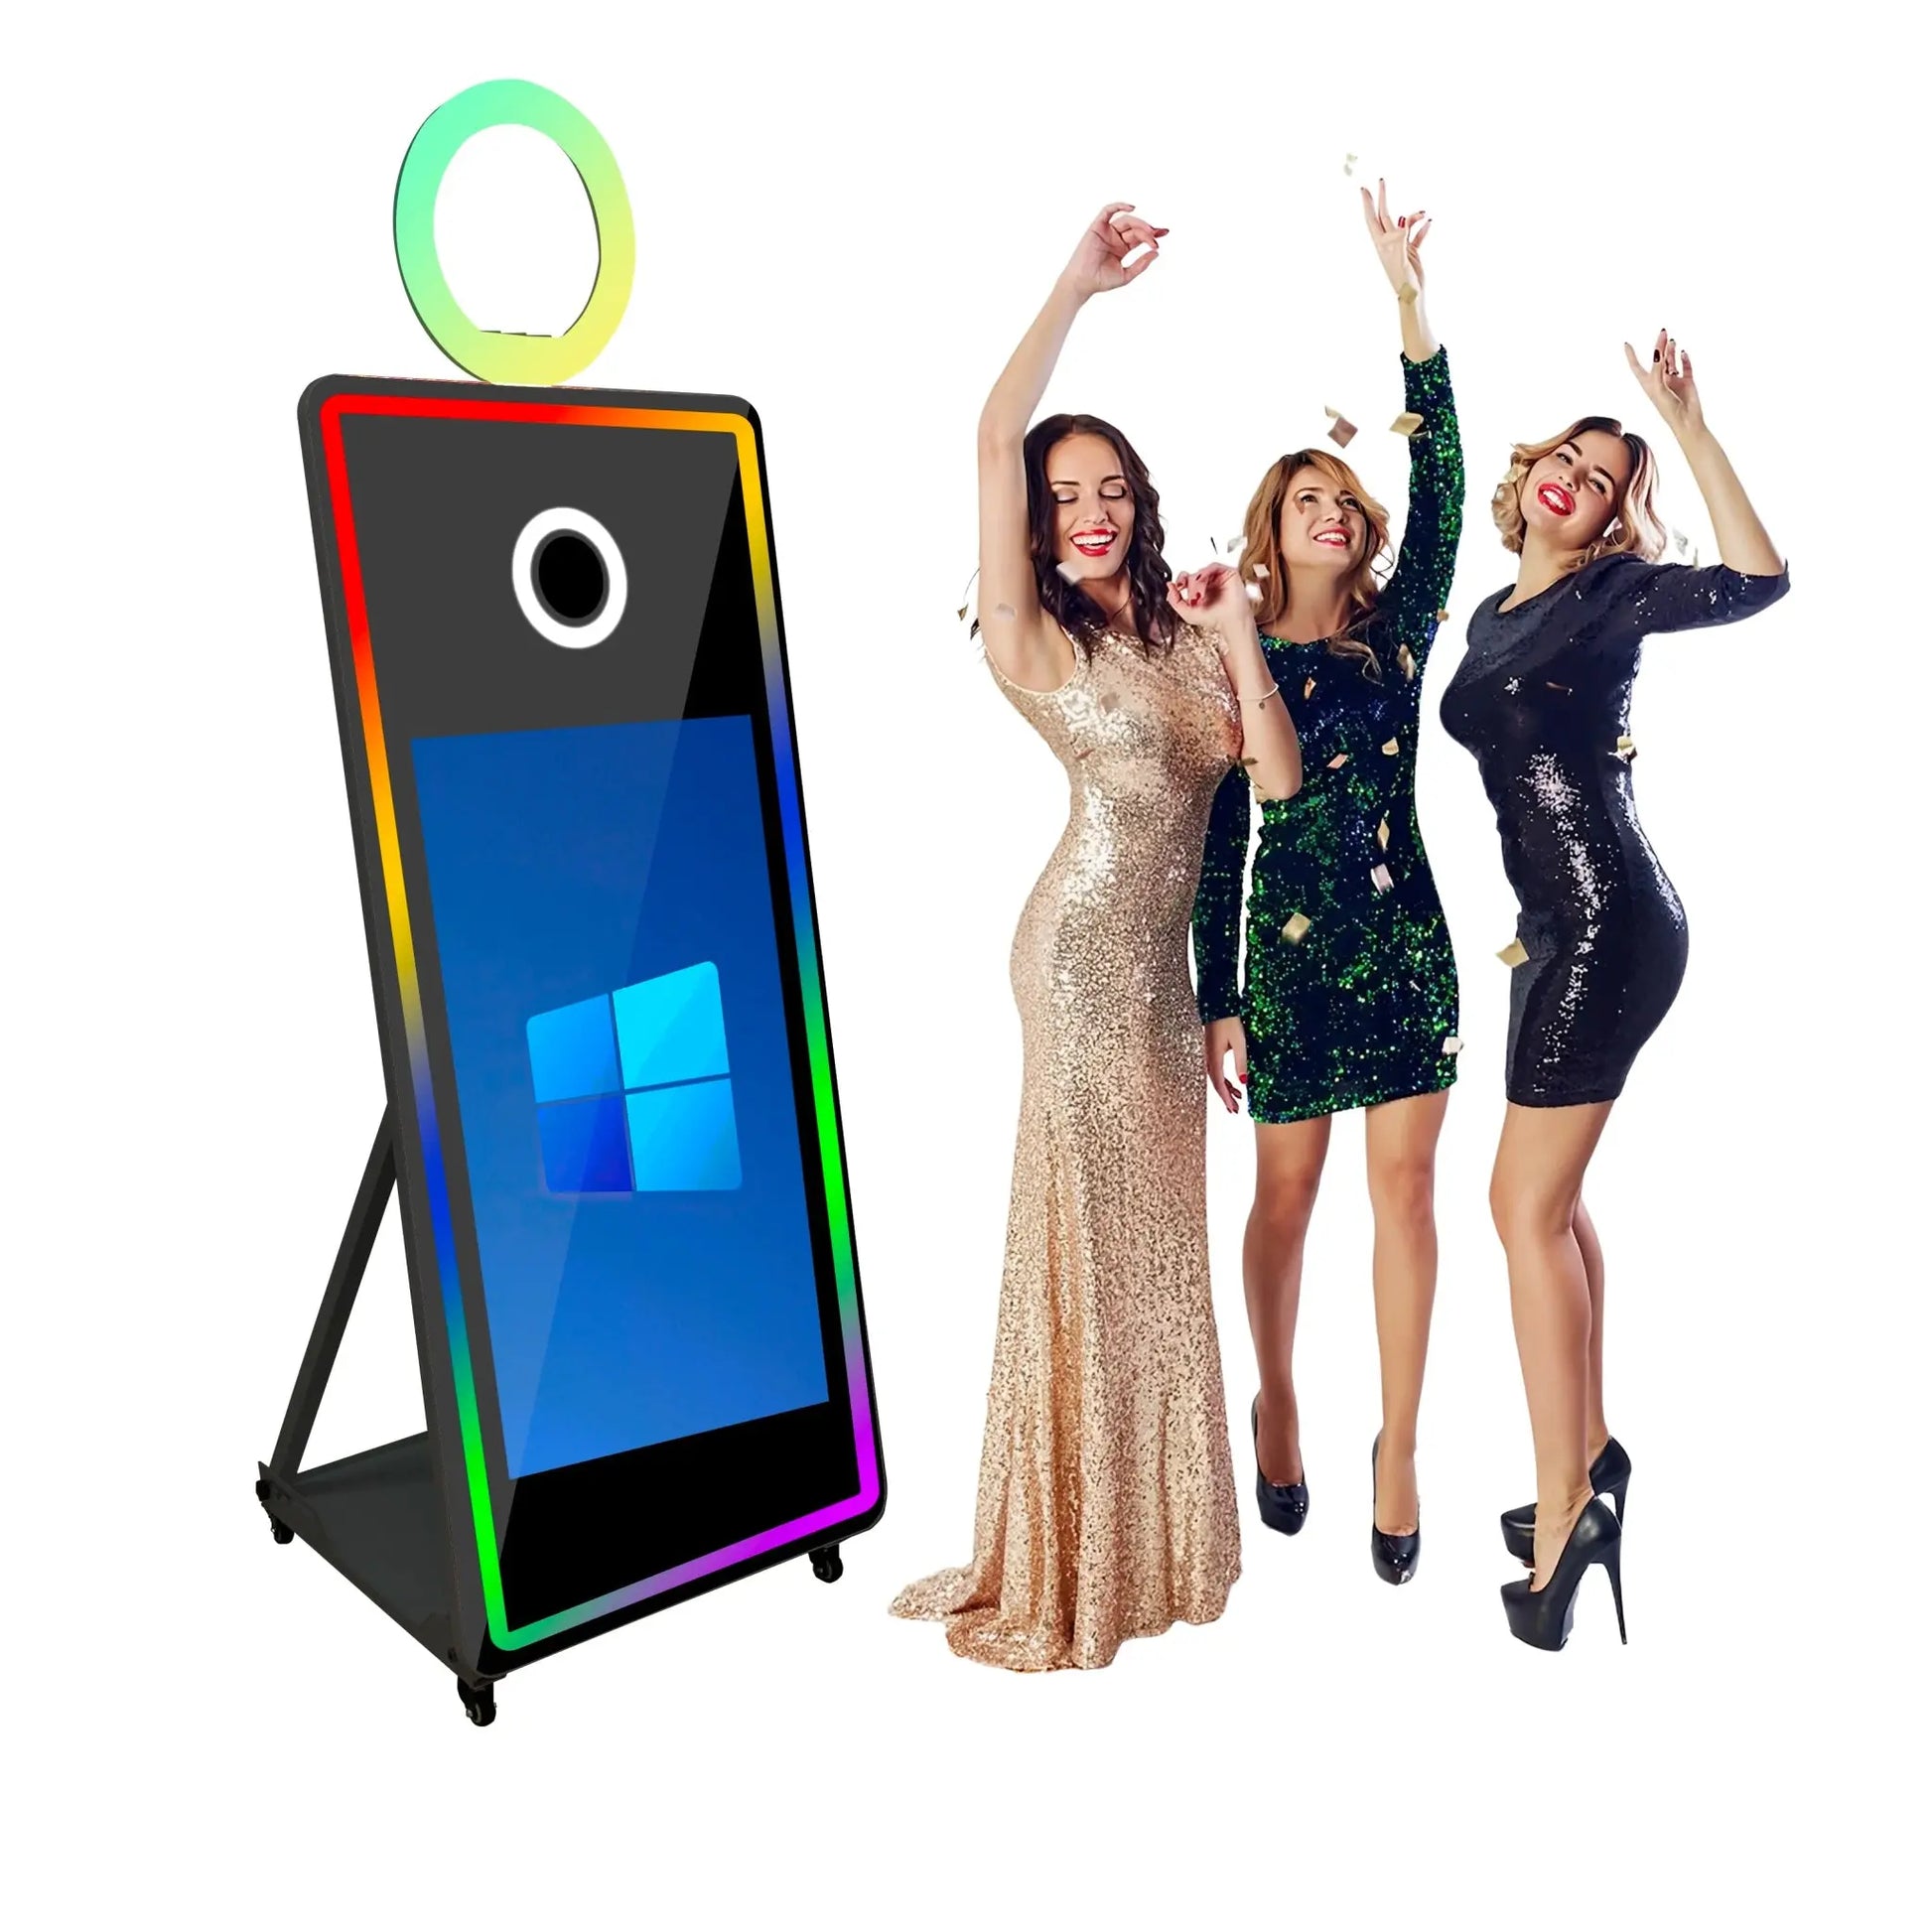 Portable Selfie Mirror Photo Booth Machine 32 Inch or 43inch Touch Screeen With Camera Printer For Party